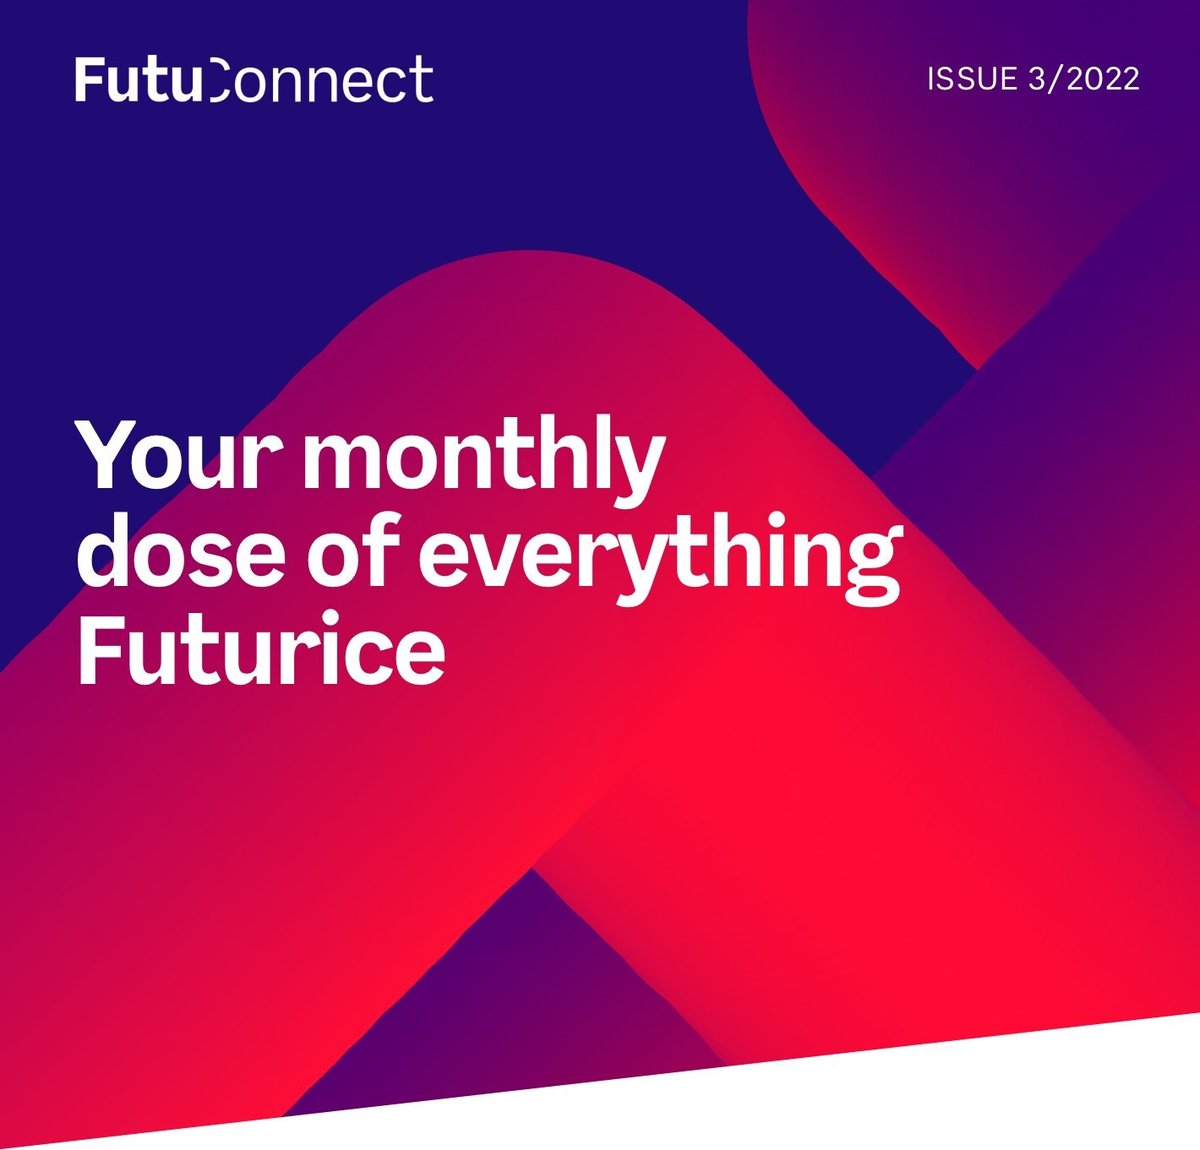 FutuConnect Newsletter Issue 3/2022